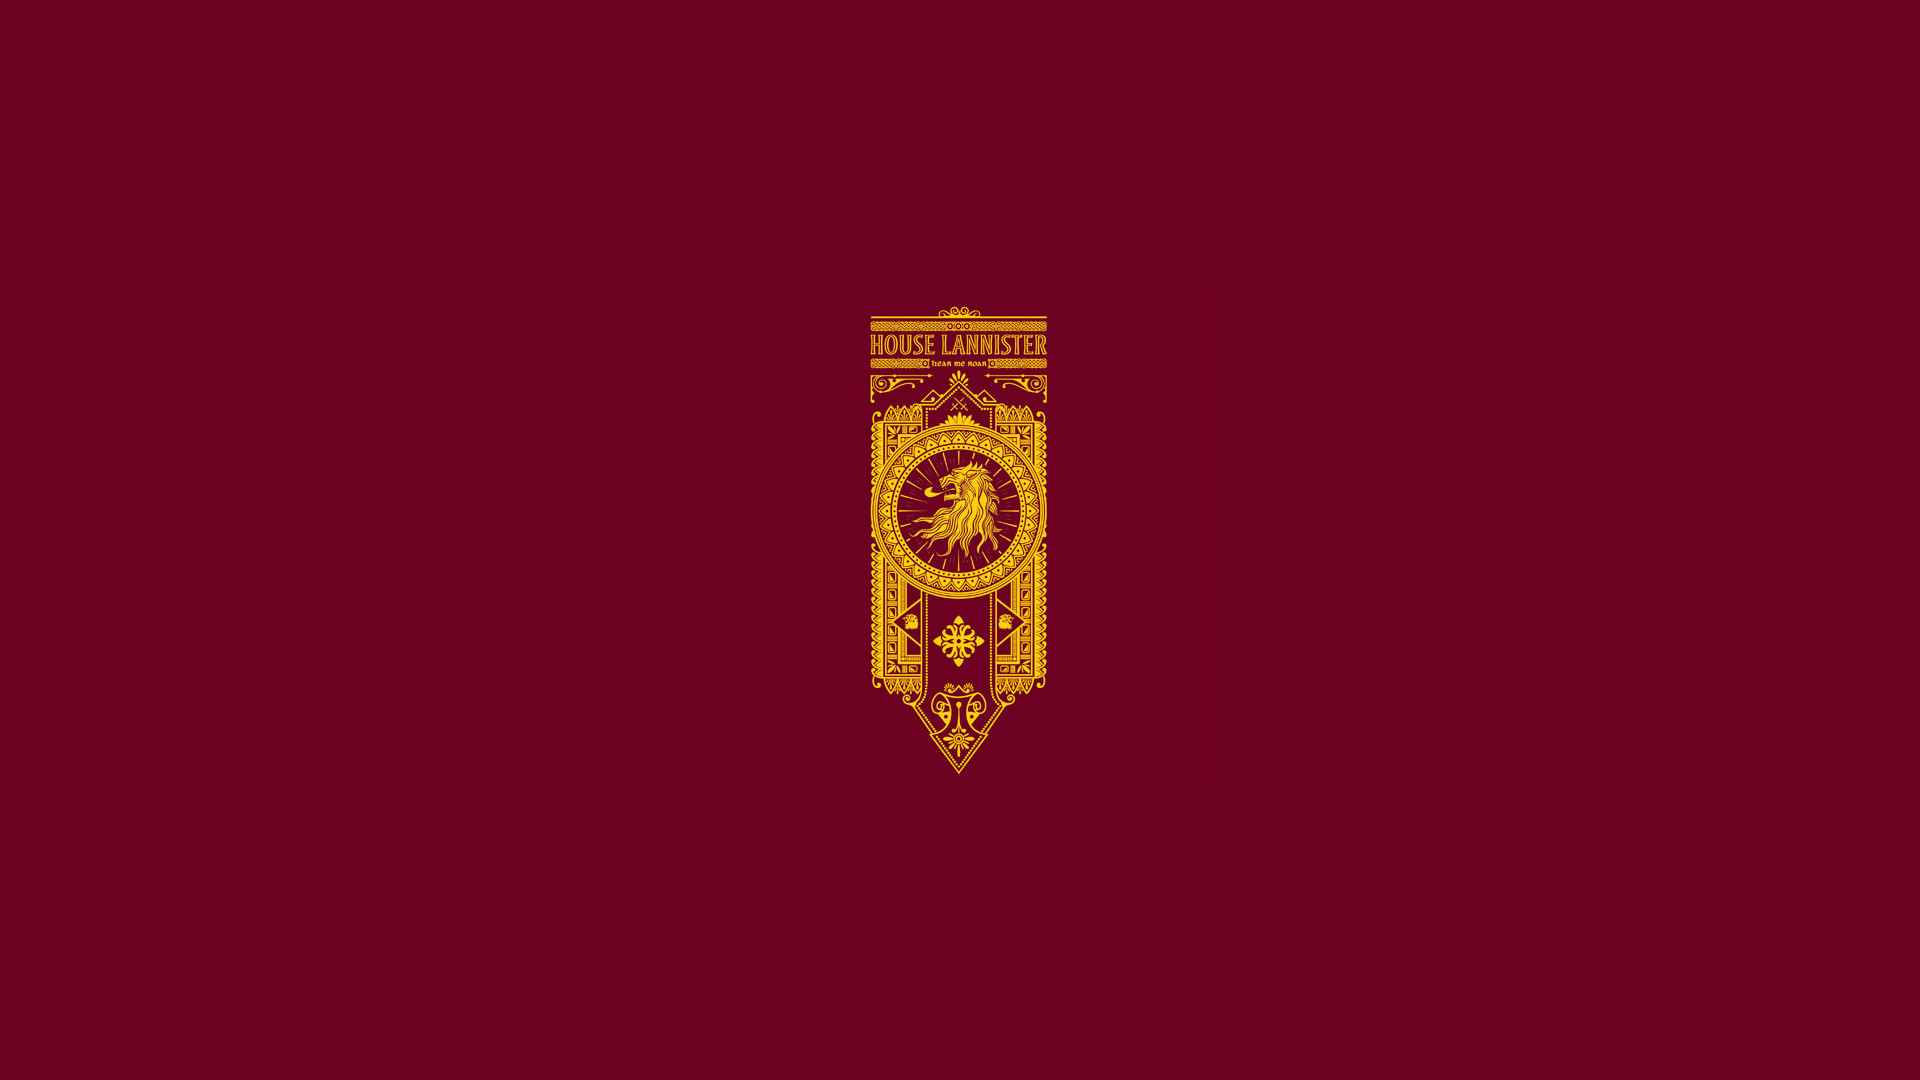 1920x1080 [No Spoilers] Some cool minimalist GoT wallpapers, courtesy of /r/minimalism!  : gameofthrones